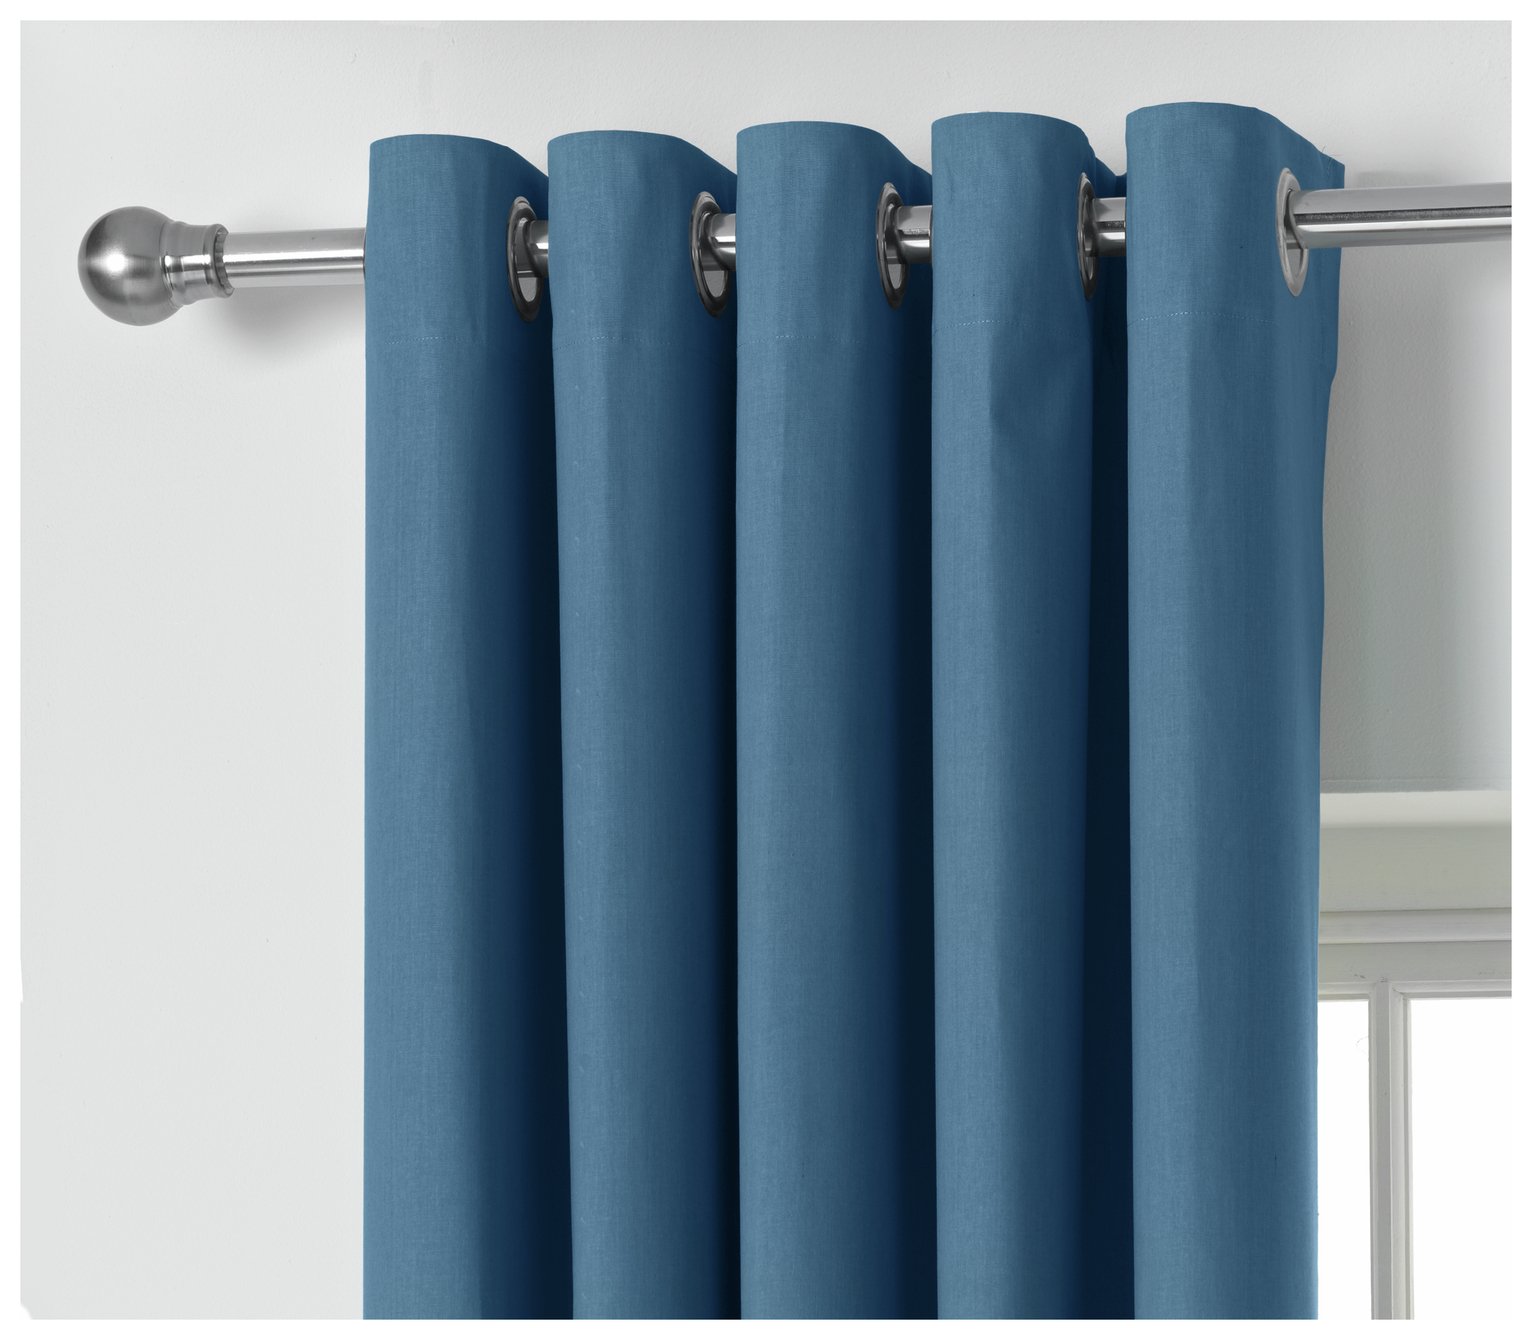 ColourMatch Thermal Blackout Curtains - 117x183cm - Navy